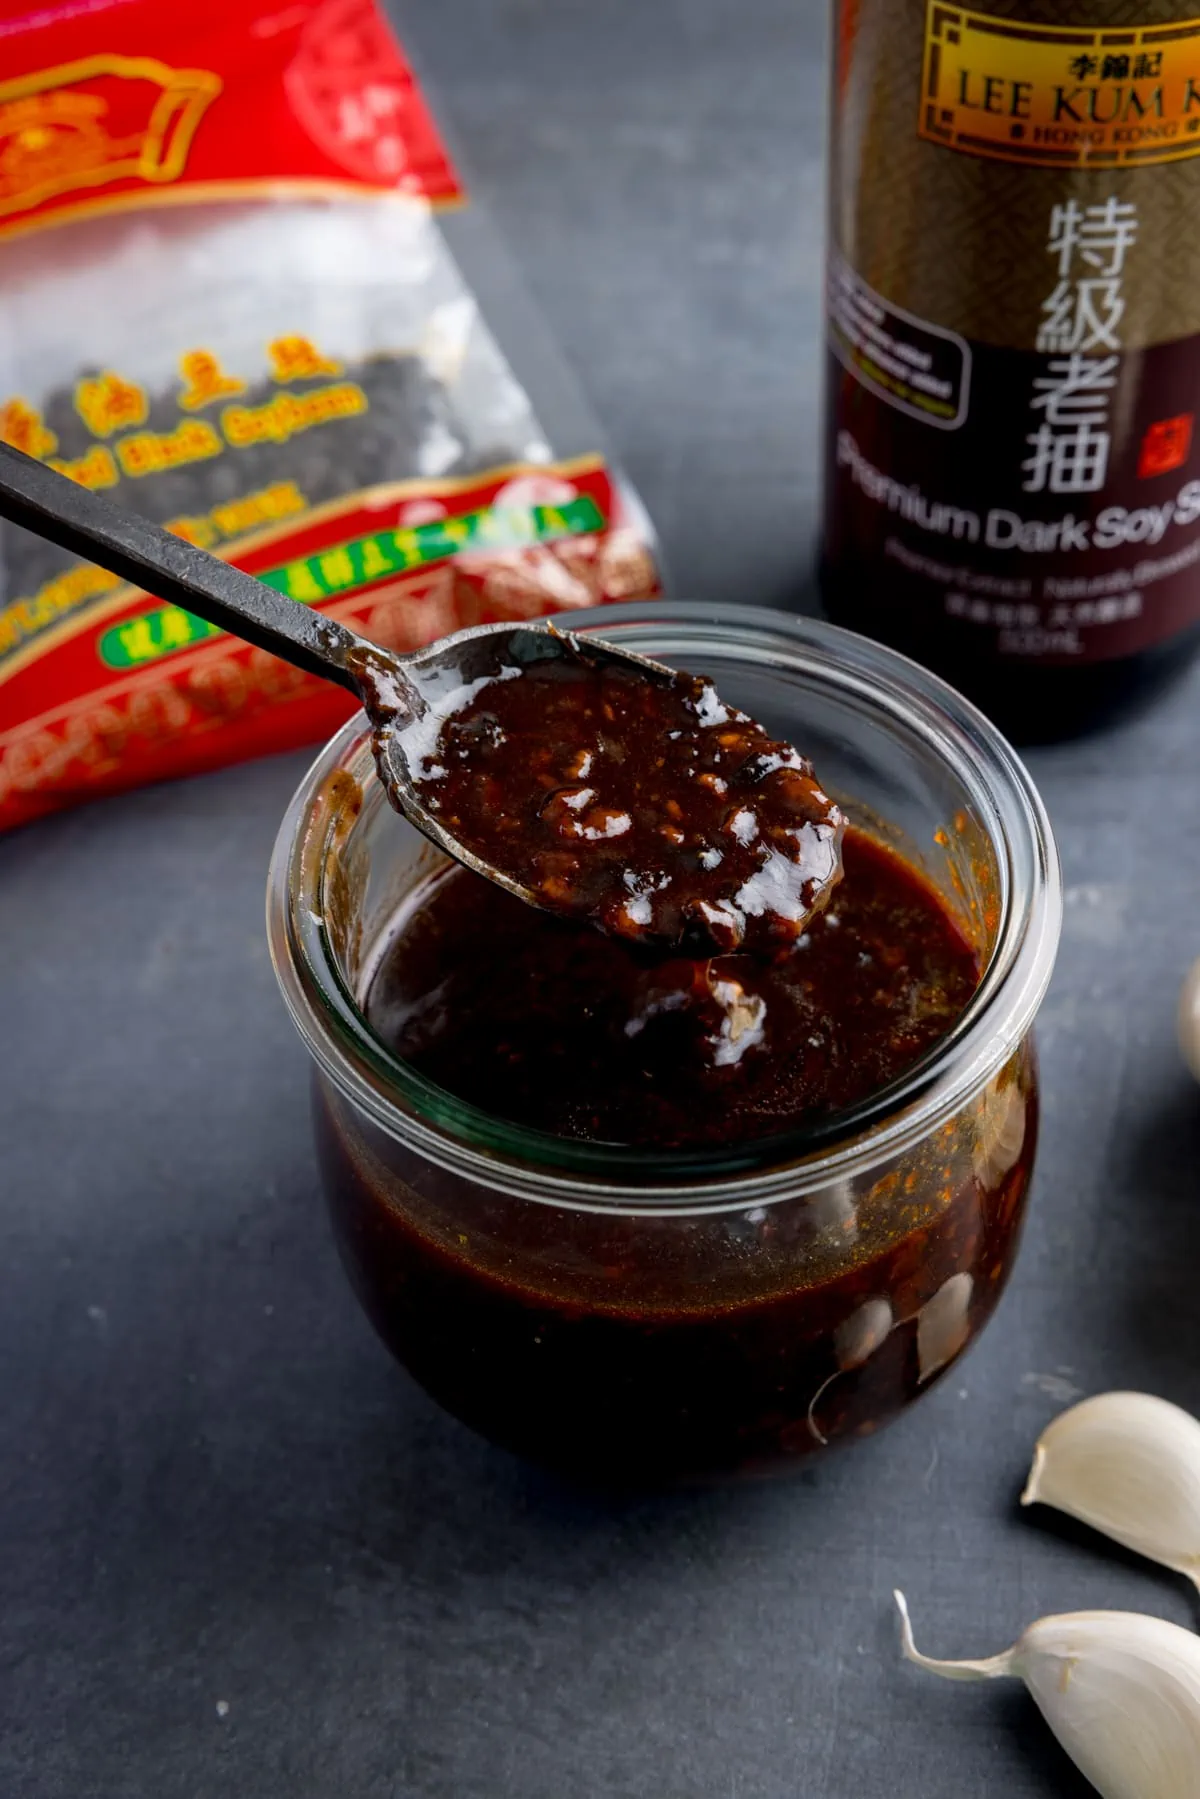 How to make Soy Sauce at home?